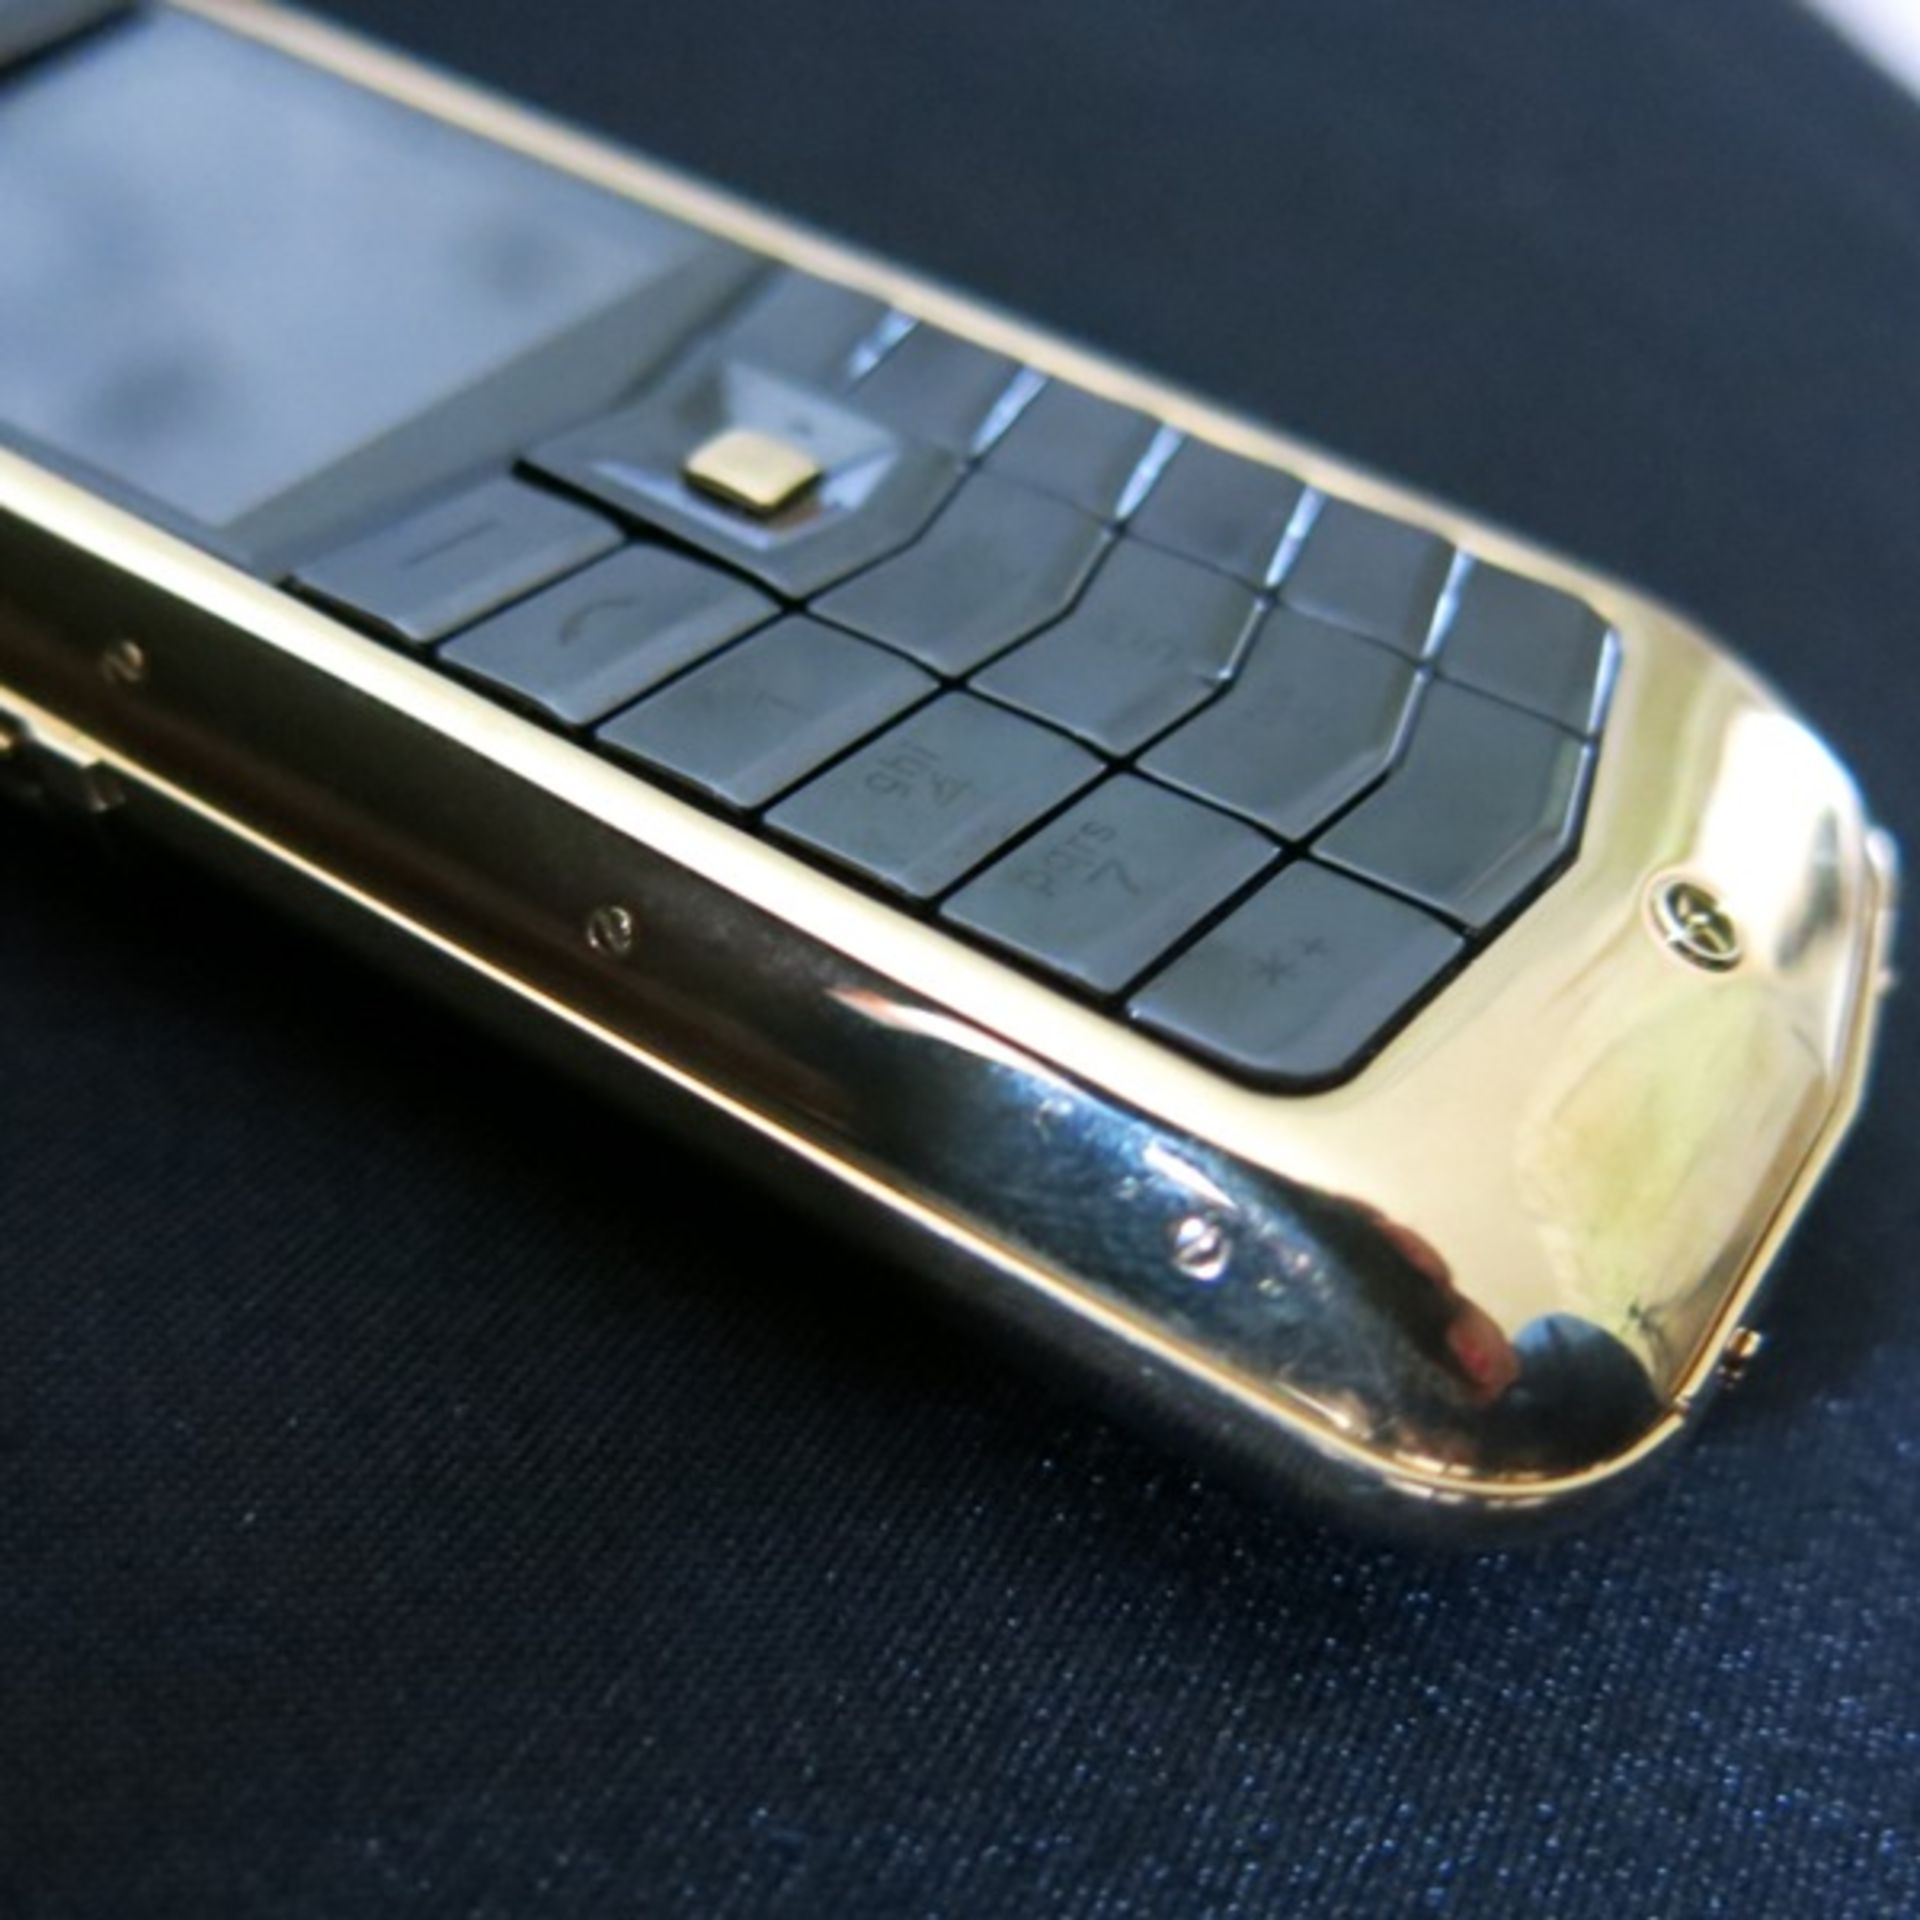 Vertu Constellation Classic with 18kt Yellow Gold Bezel, Back Plate, Select Key & Quarter Turn. - Image 4 of 6